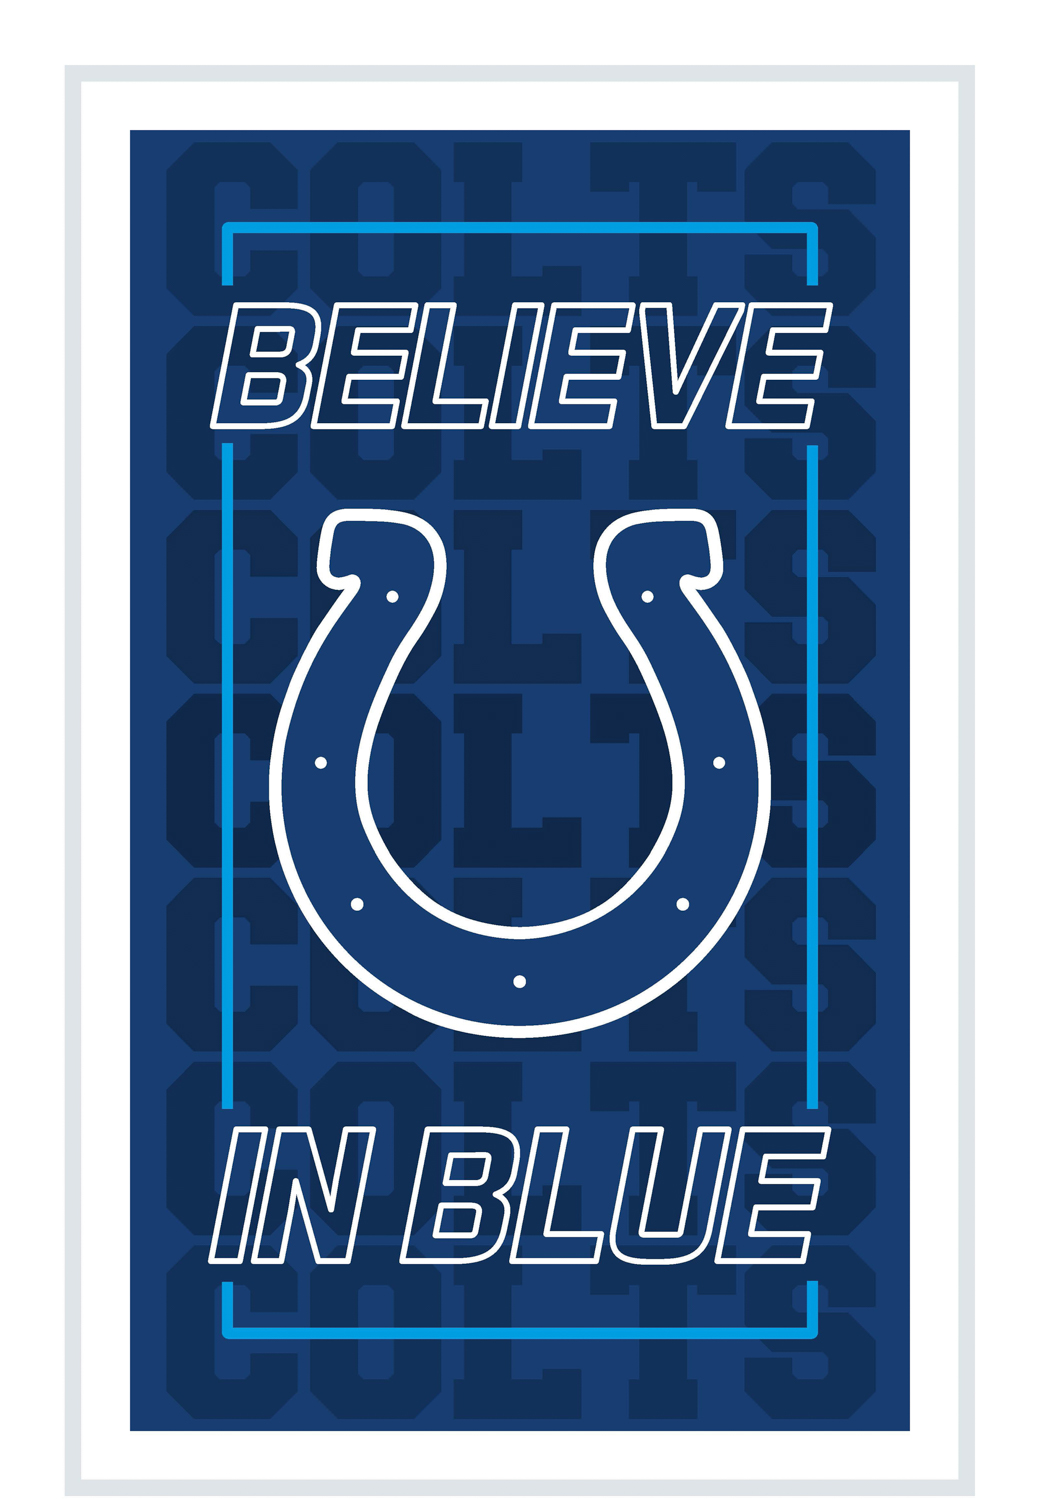 INDIANAPOLIS COLTS RECTANGLE NEOLITE LED WALL DECOR